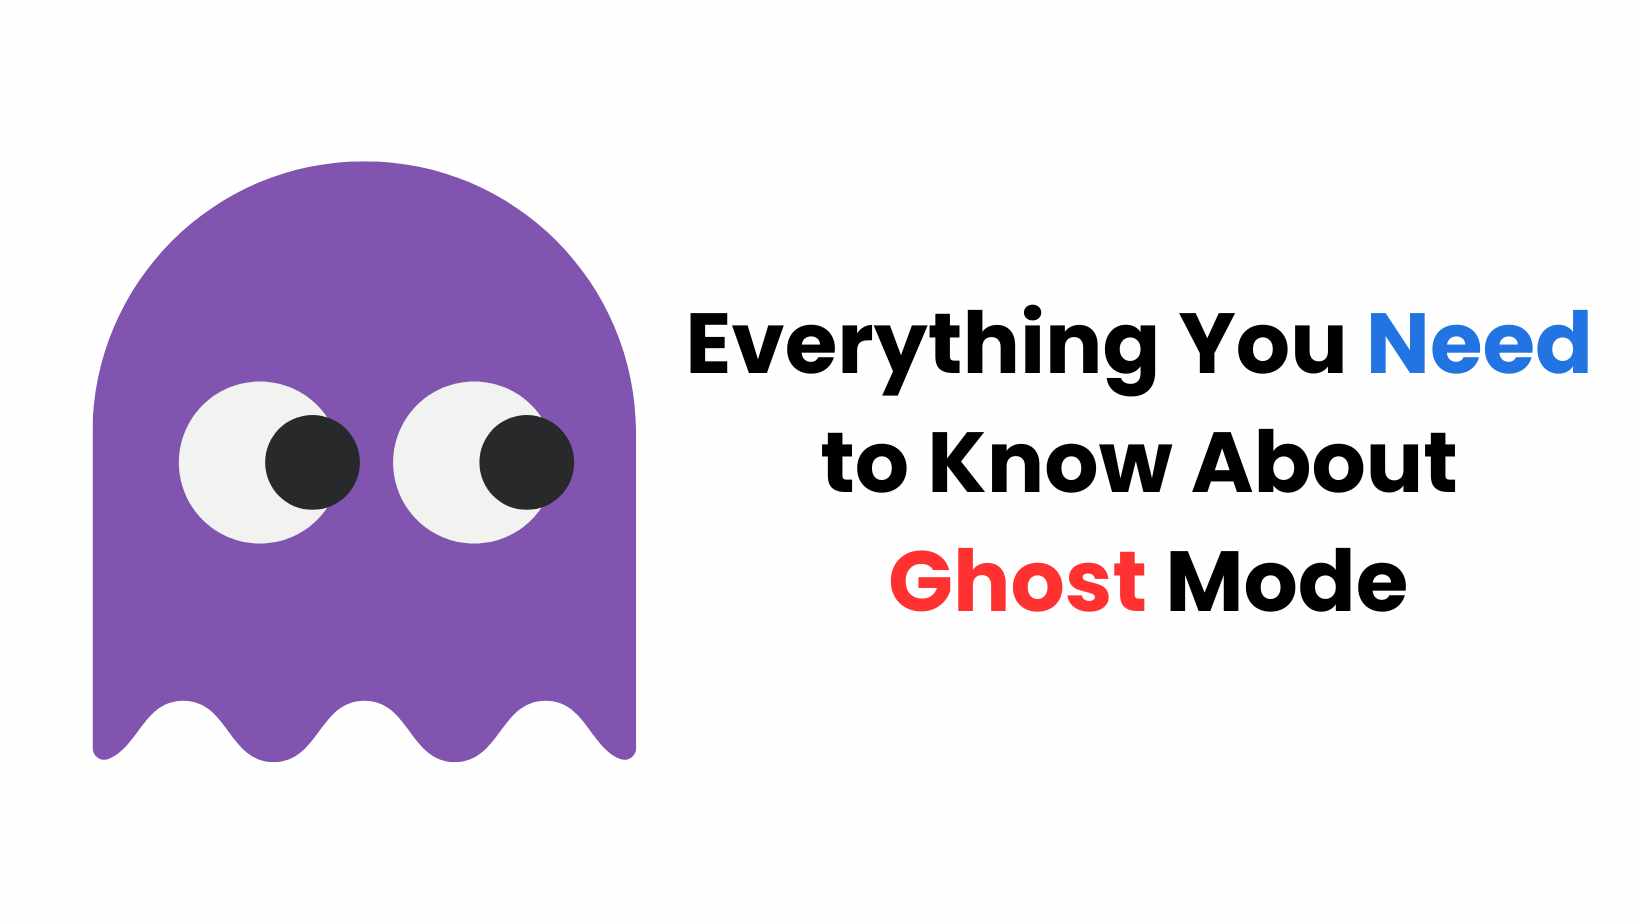 What Is Ghost Mode and How Does It Work?